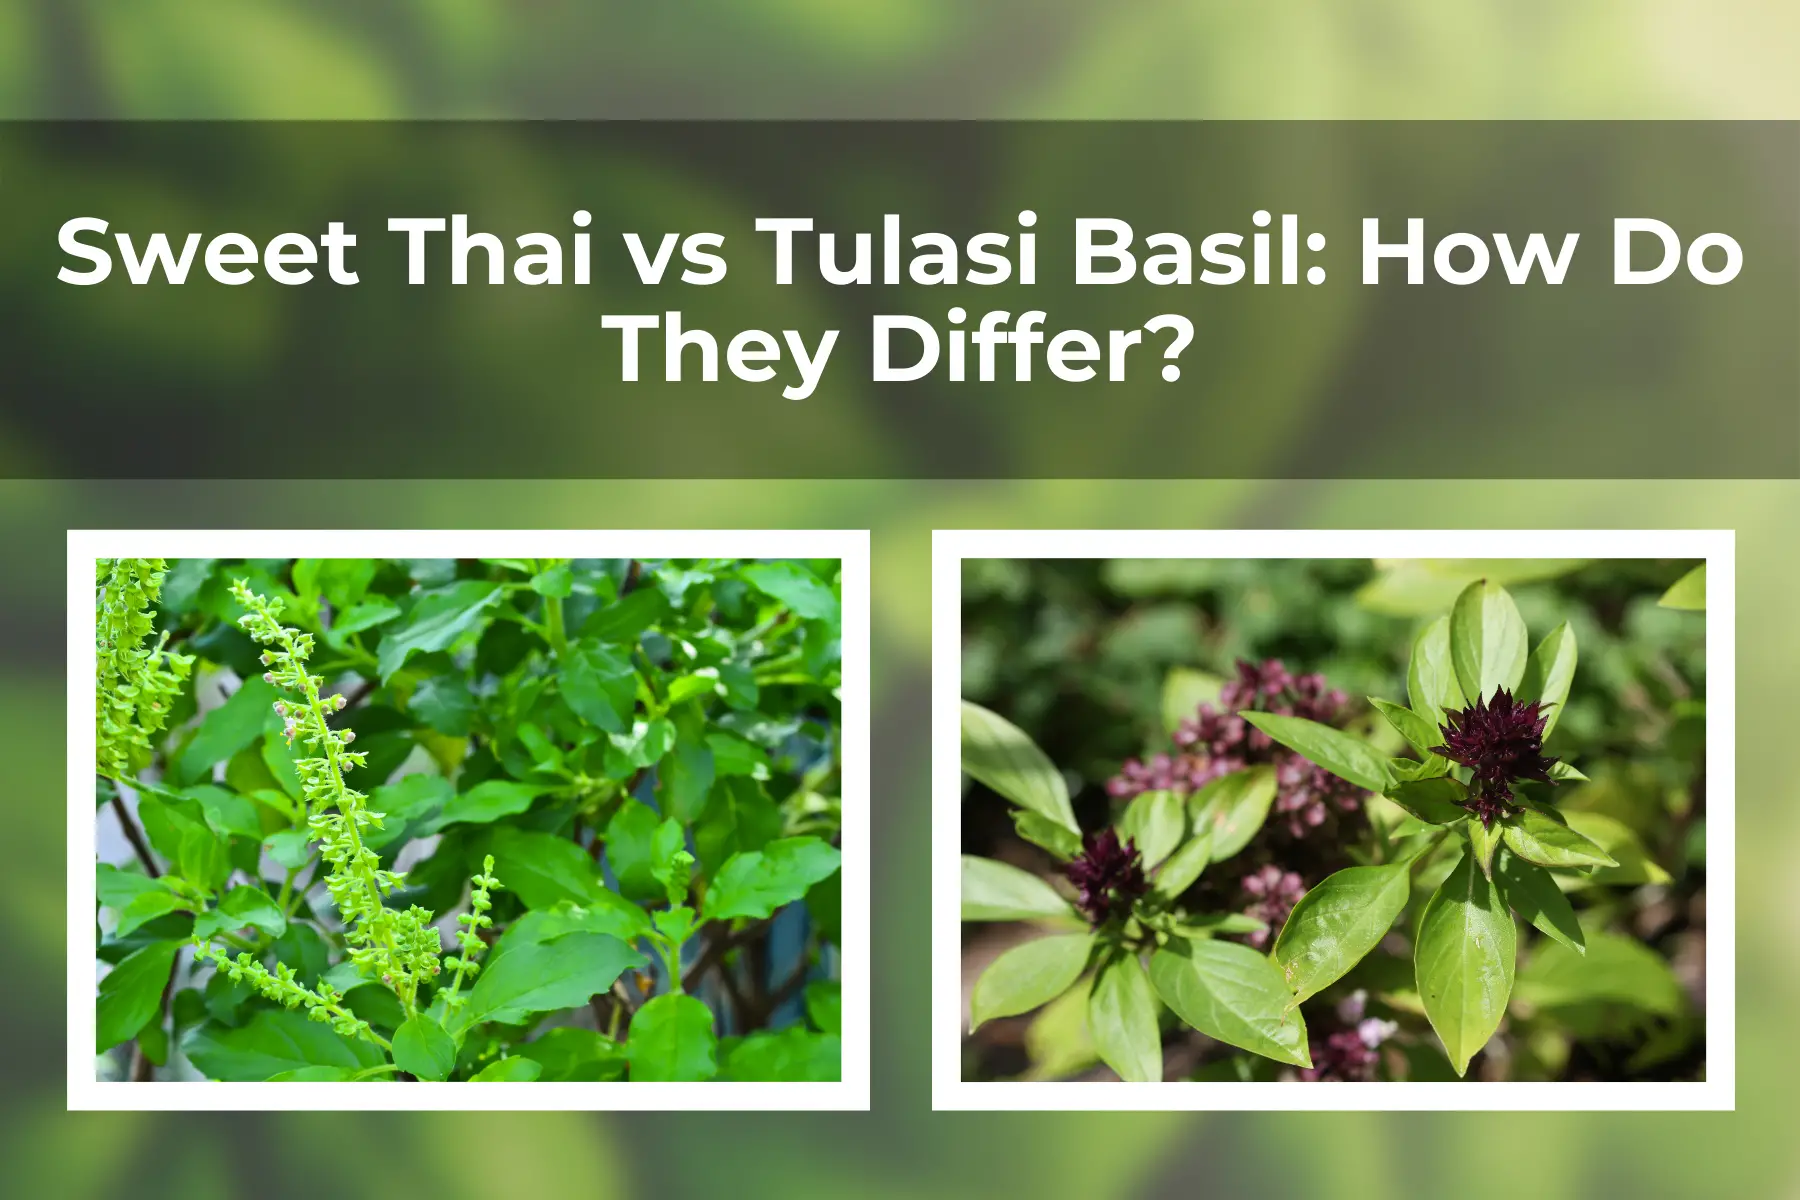 Sweet Thai vs Tulasi Basil: How Do They Differ?